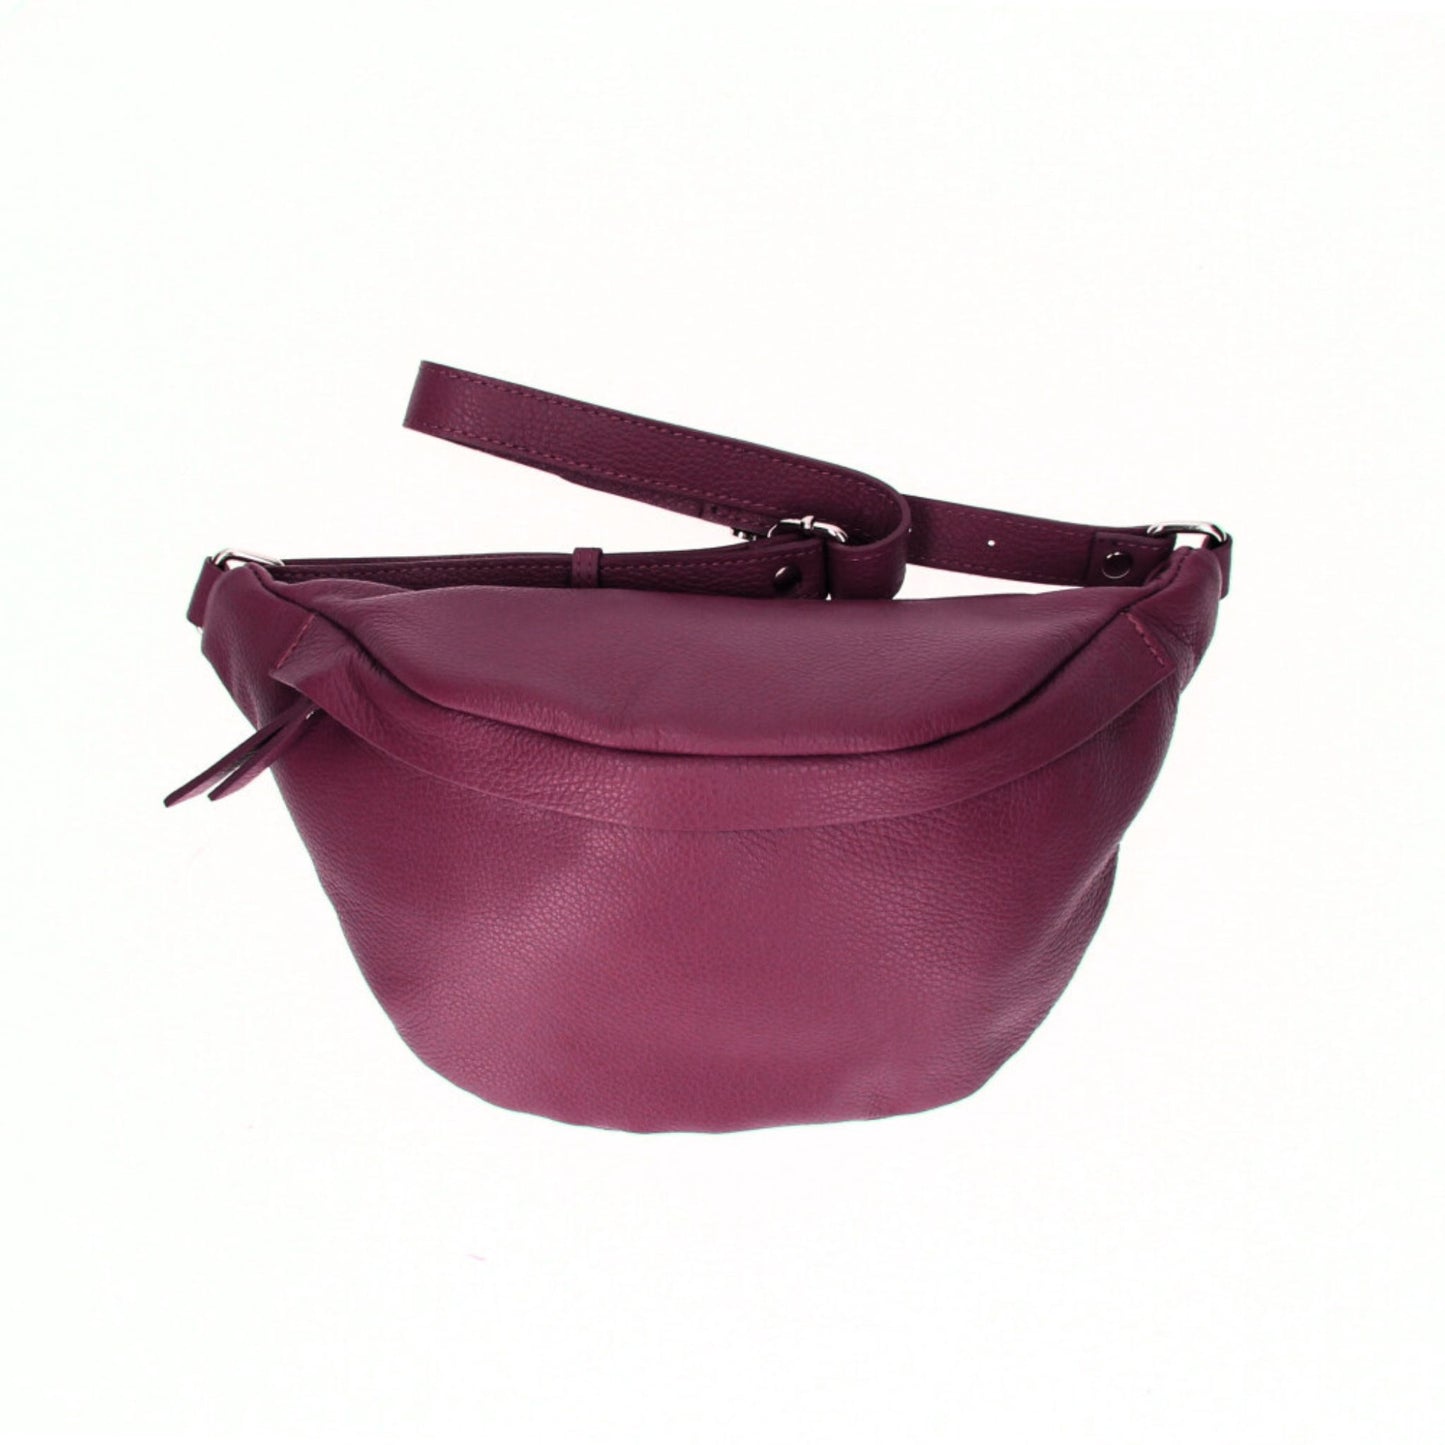 Elegant wine leather sling bag with a removable dustbag for protection.